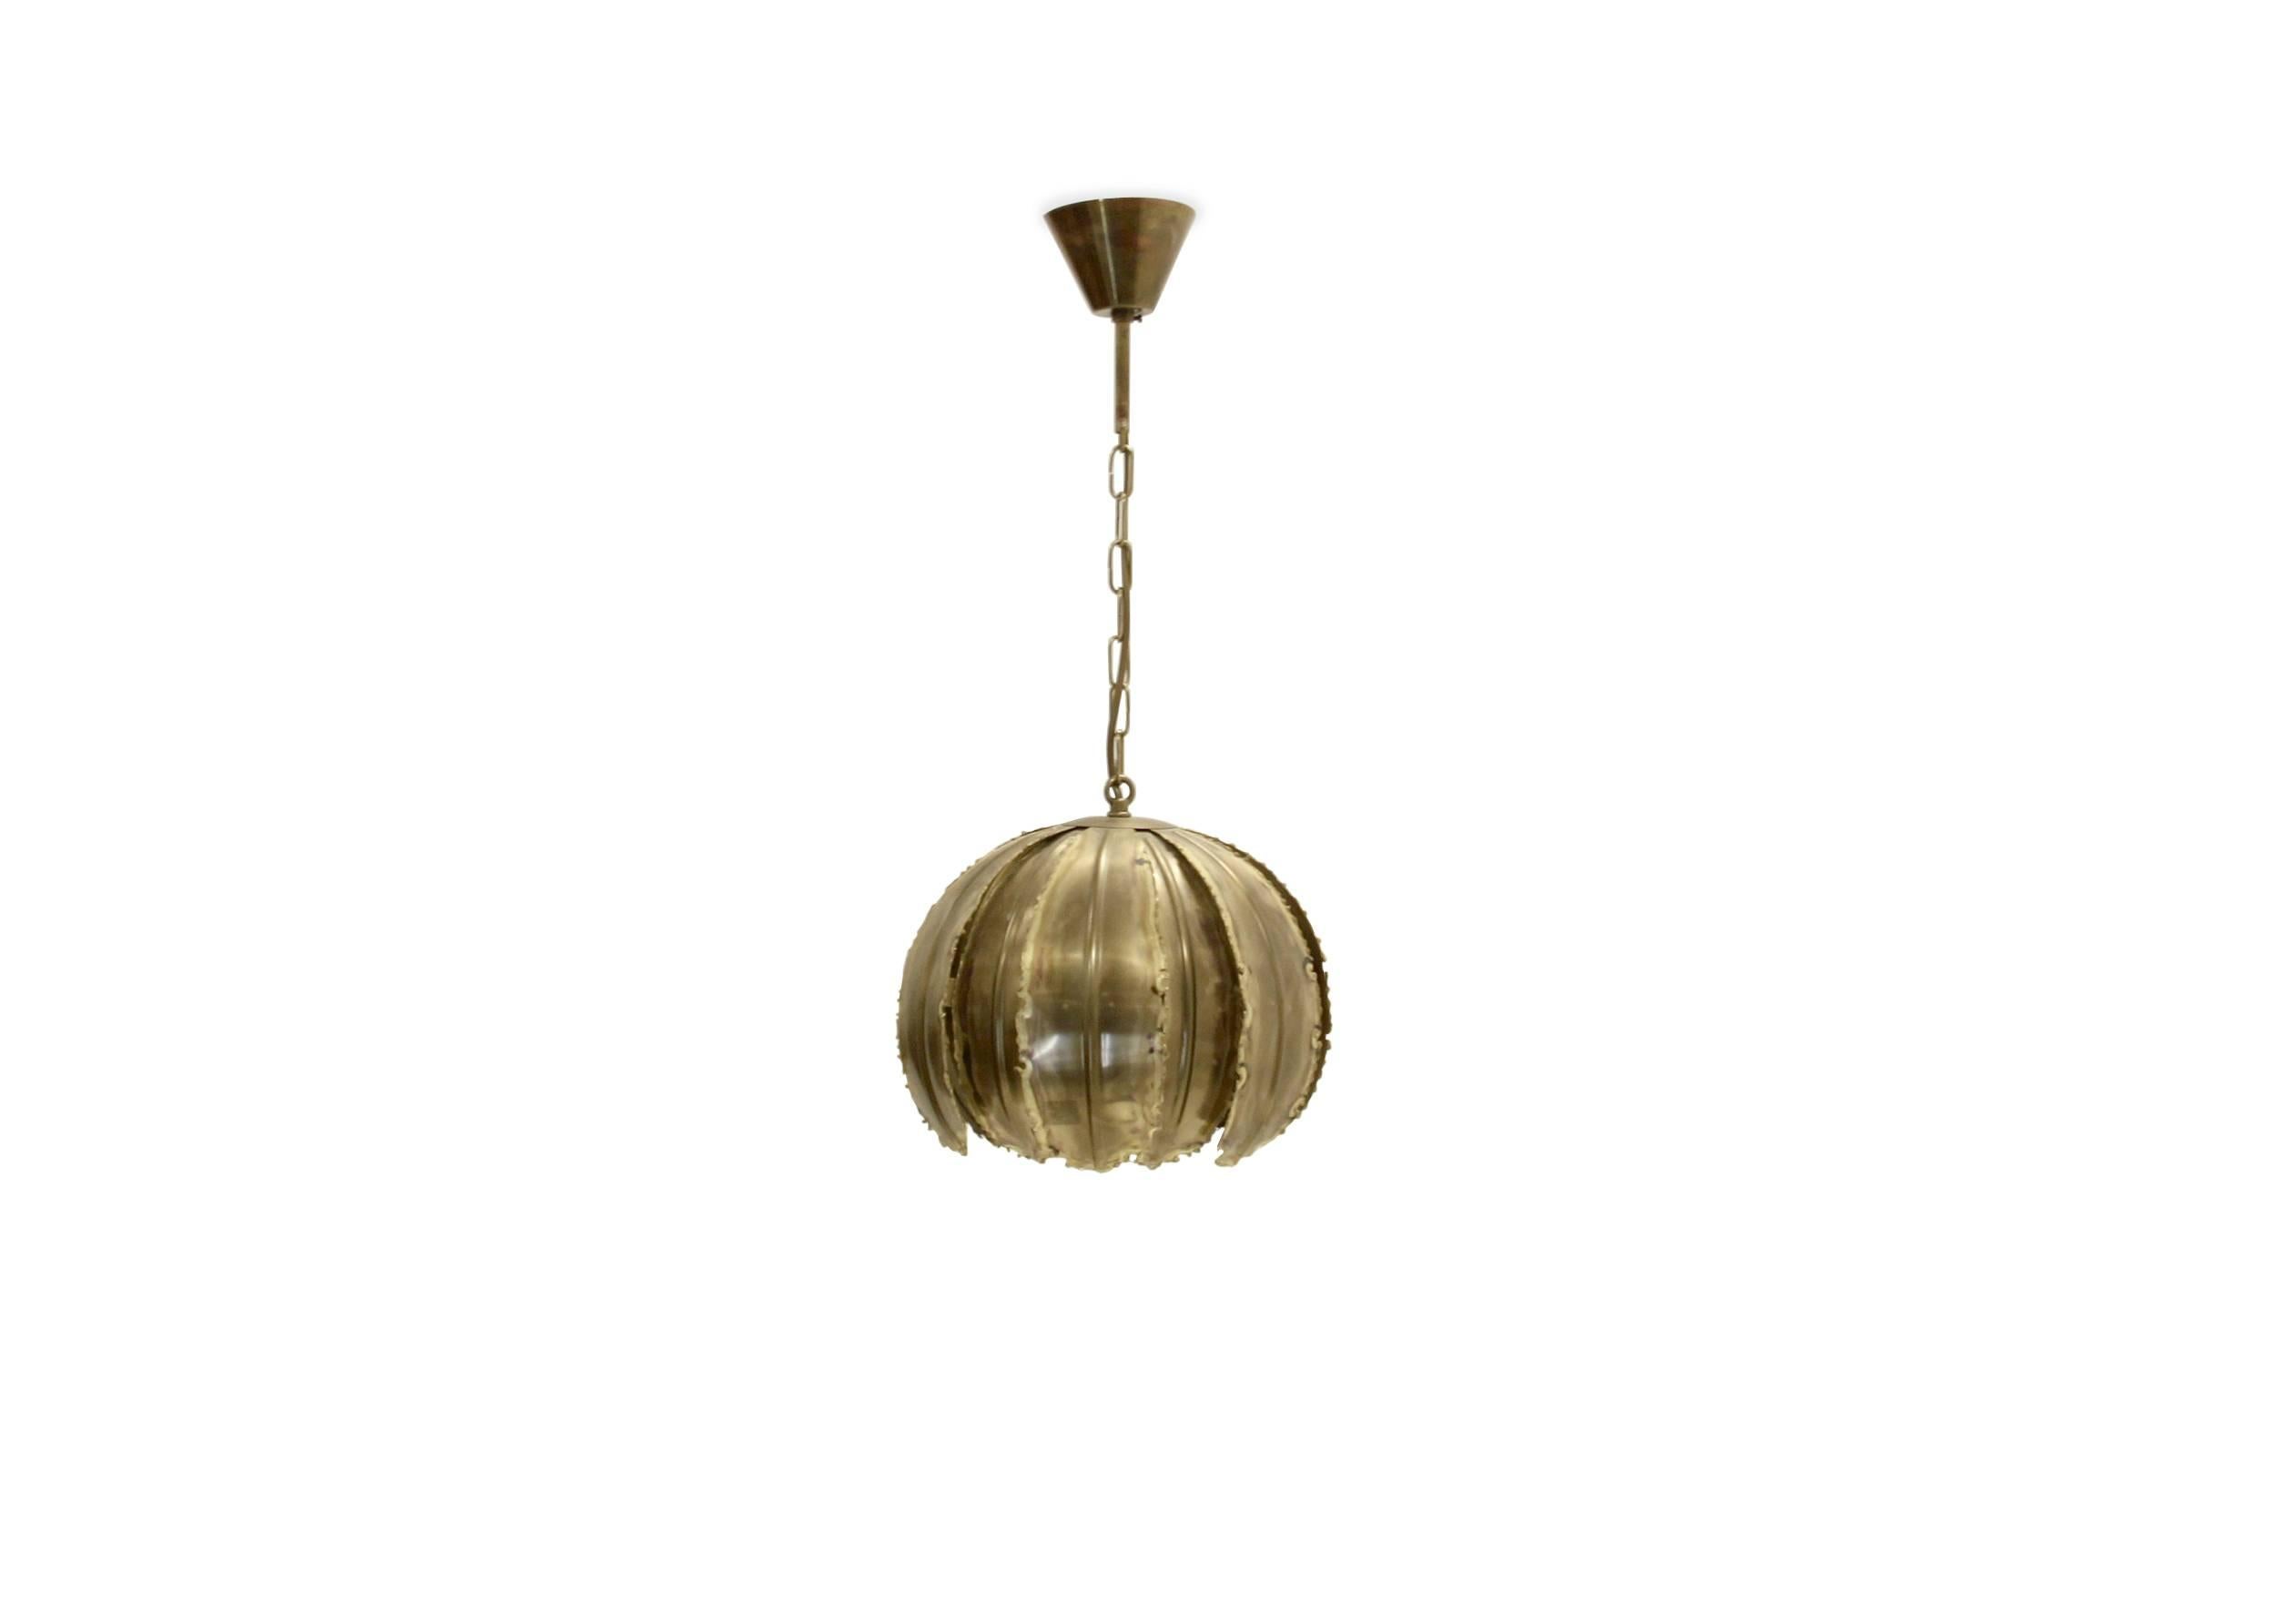 Well made and decorative ceiling pendant in patinated brass. This is model 'Poppy'. Designed by Svend Aage Holm and made in Denmark by Holm Sørensen from circa 1970s second half. The pendant is fully working and functional. Please note the metal